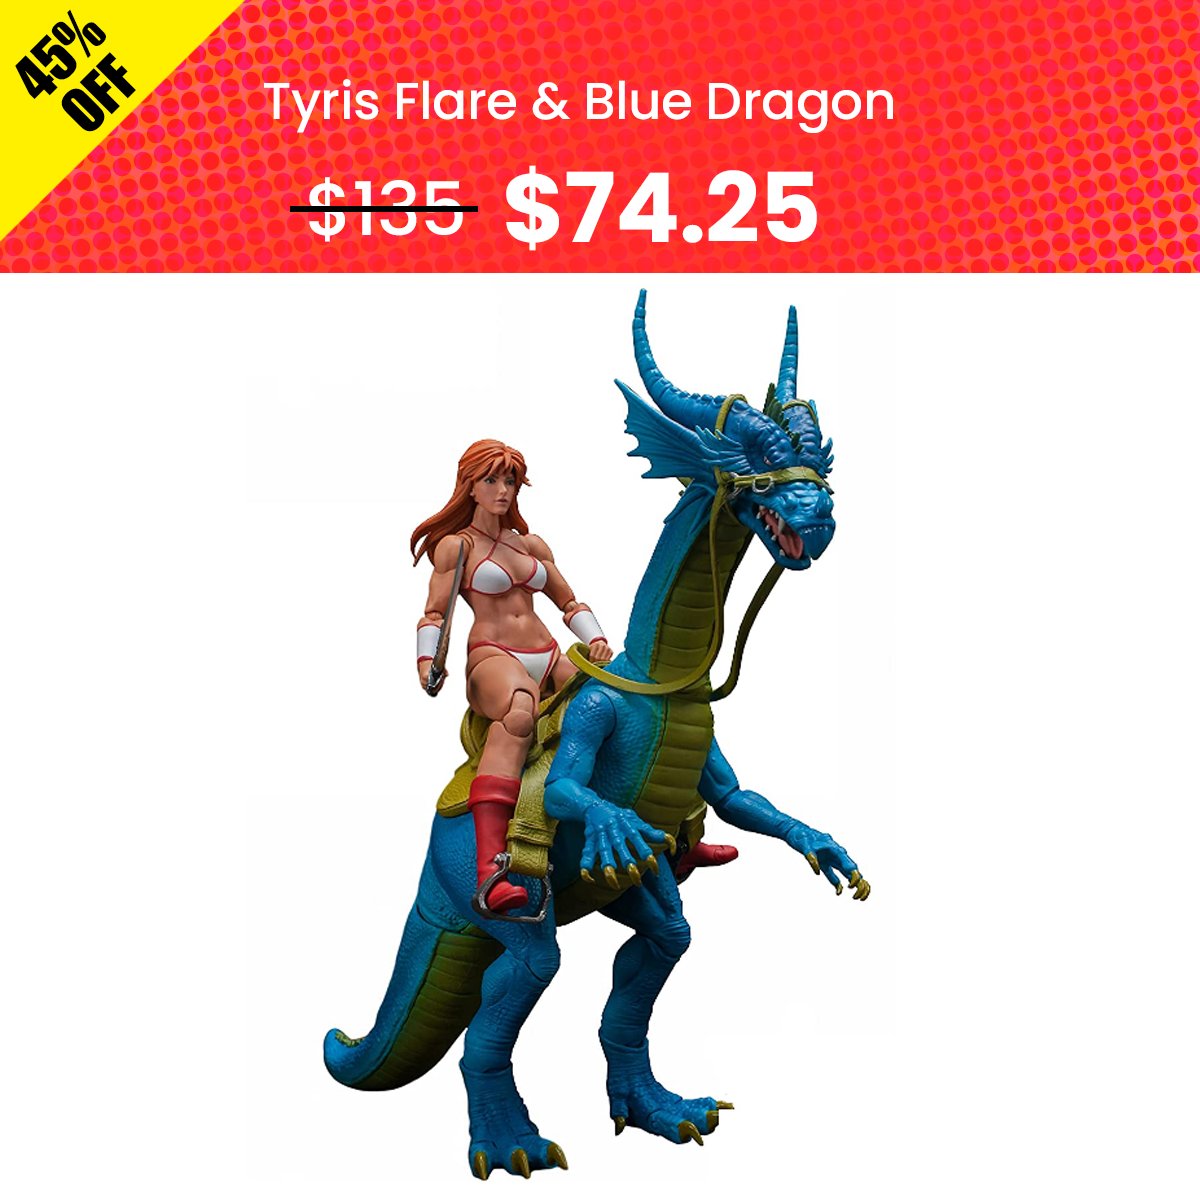 Gilius Thunderhead and Tyris Flare are both 45% OFF during our Black Friday Sale. Don't miss this offer to add them to your Storm Collectibles collection! 🛍️ shop.bandai.com #BlackFridayDeals #GoldenAxe